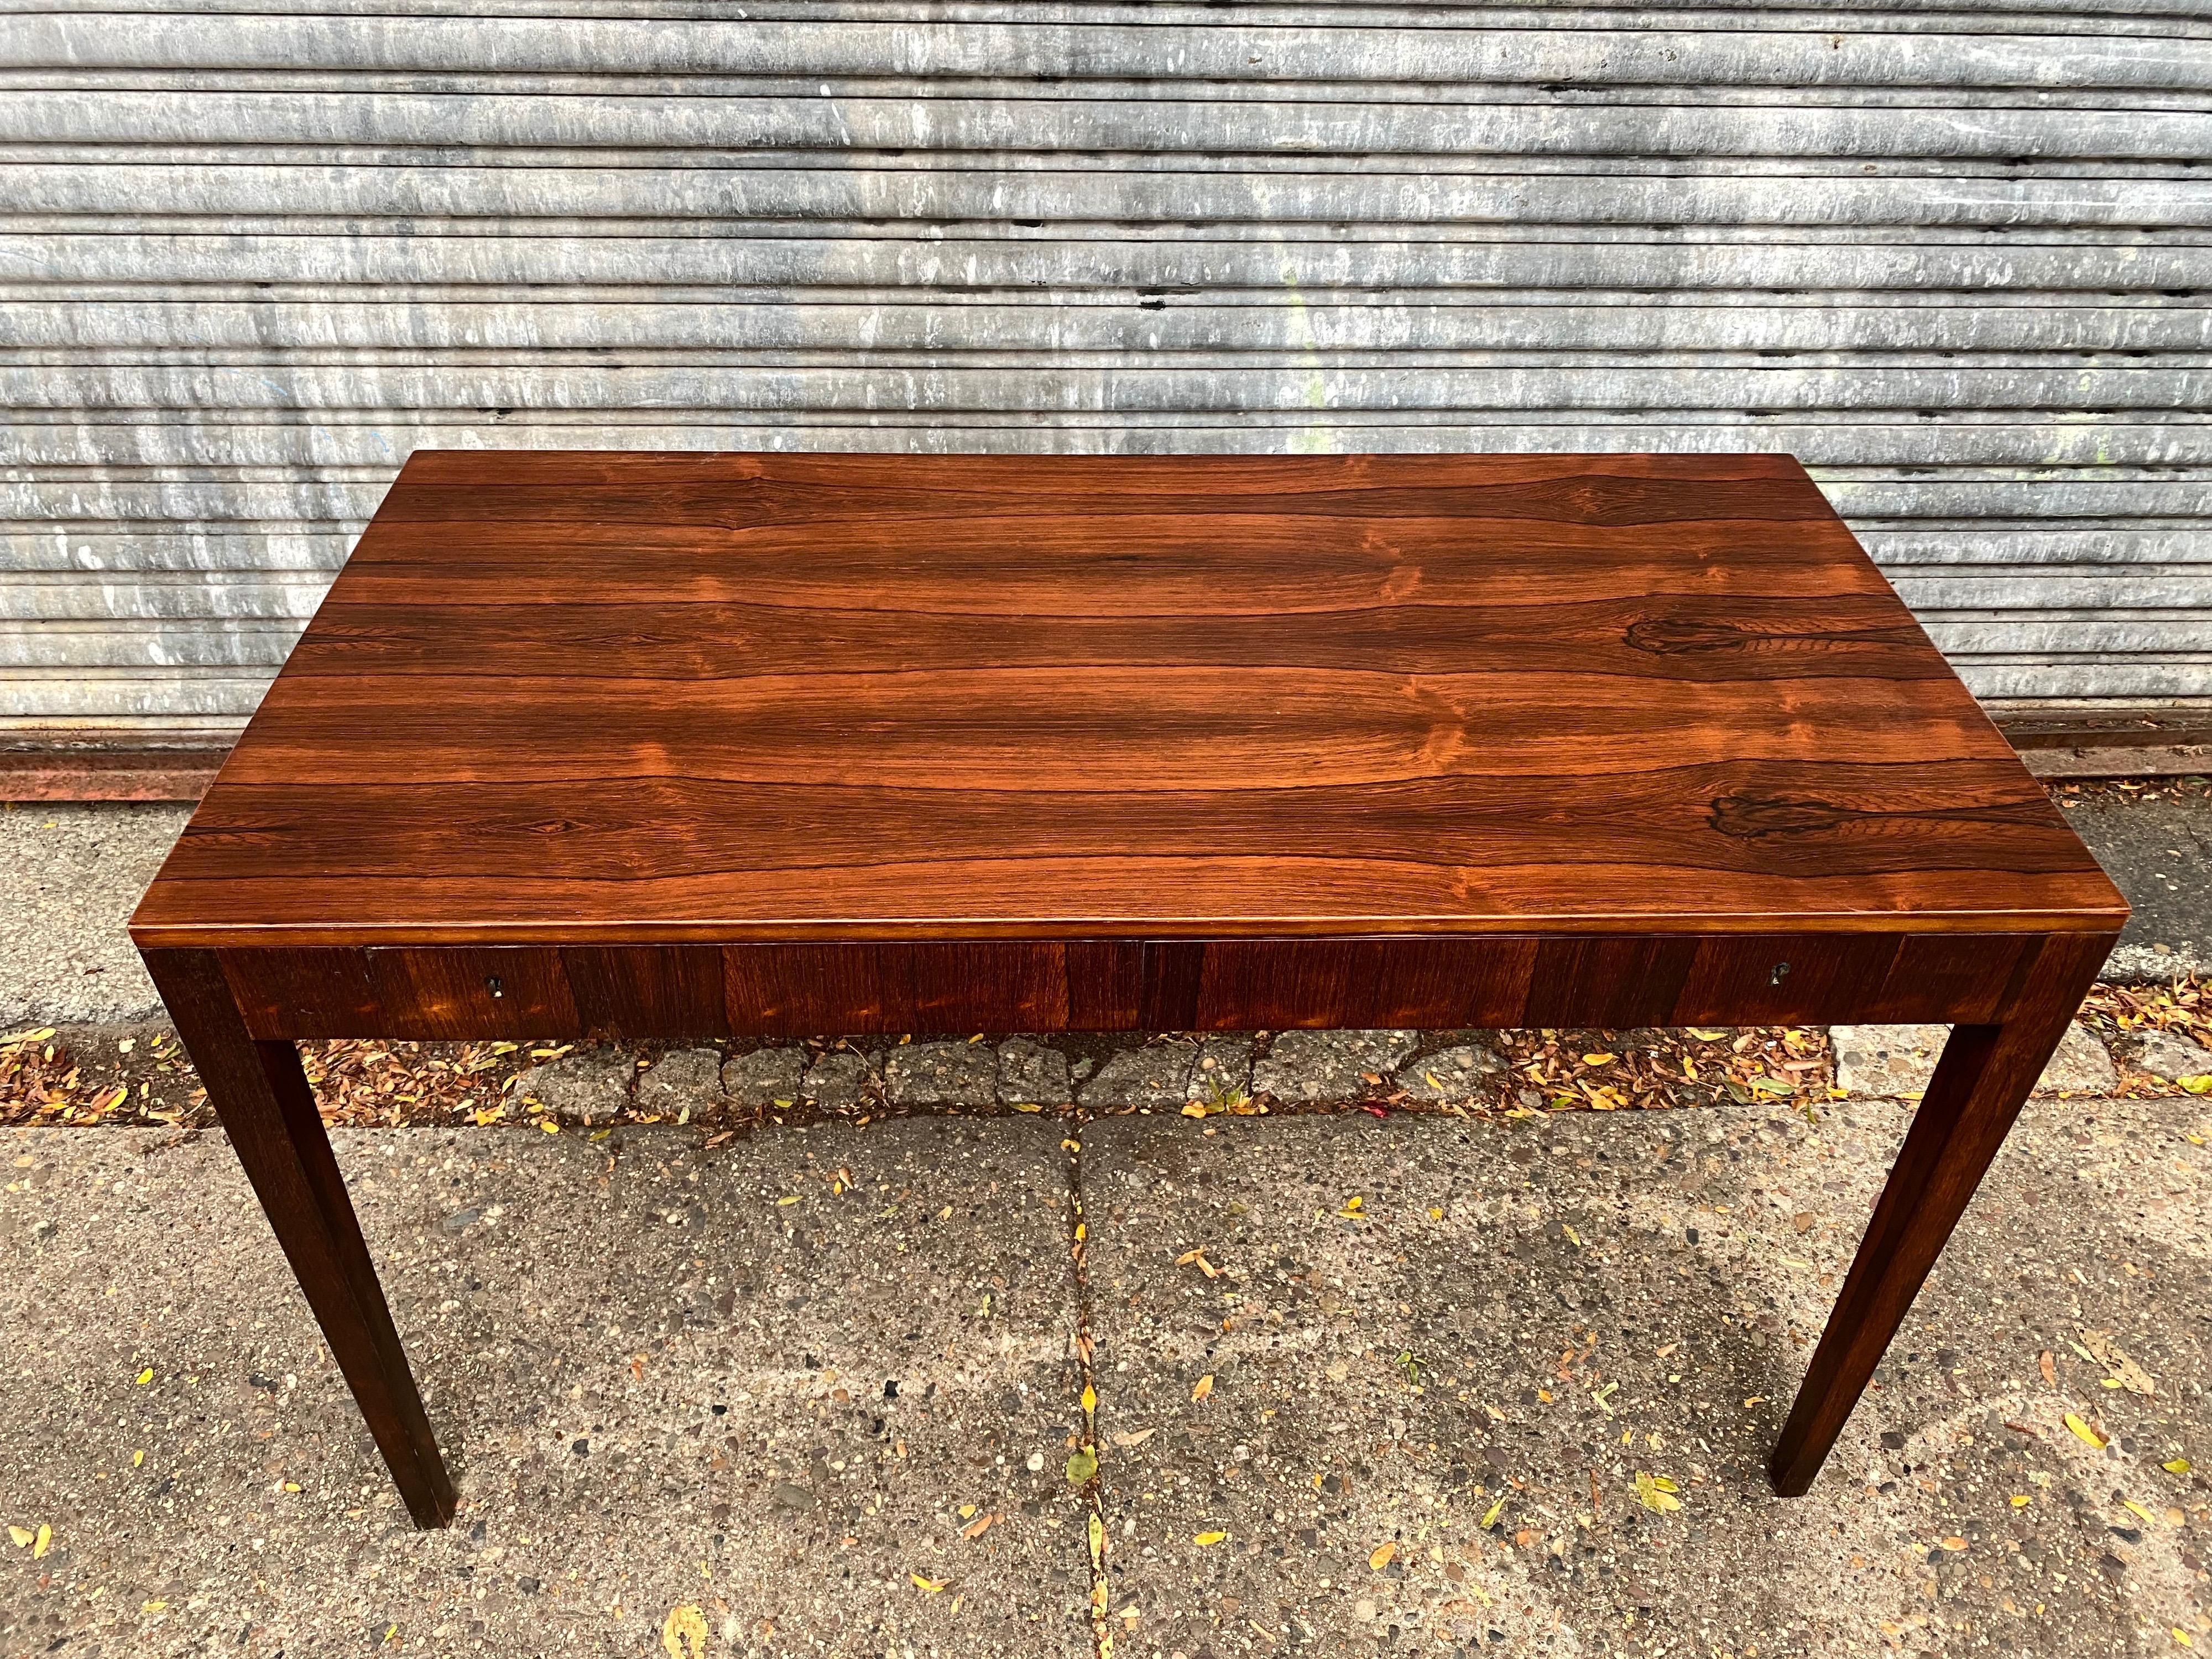 Riis Antonsen rosewood desk. Amazing Rosewood! Beautifully Refinished! 2 Large Drawers with locks, new key cut. Stamped on bottom of drawers as seen in photos. Simple elegant design!